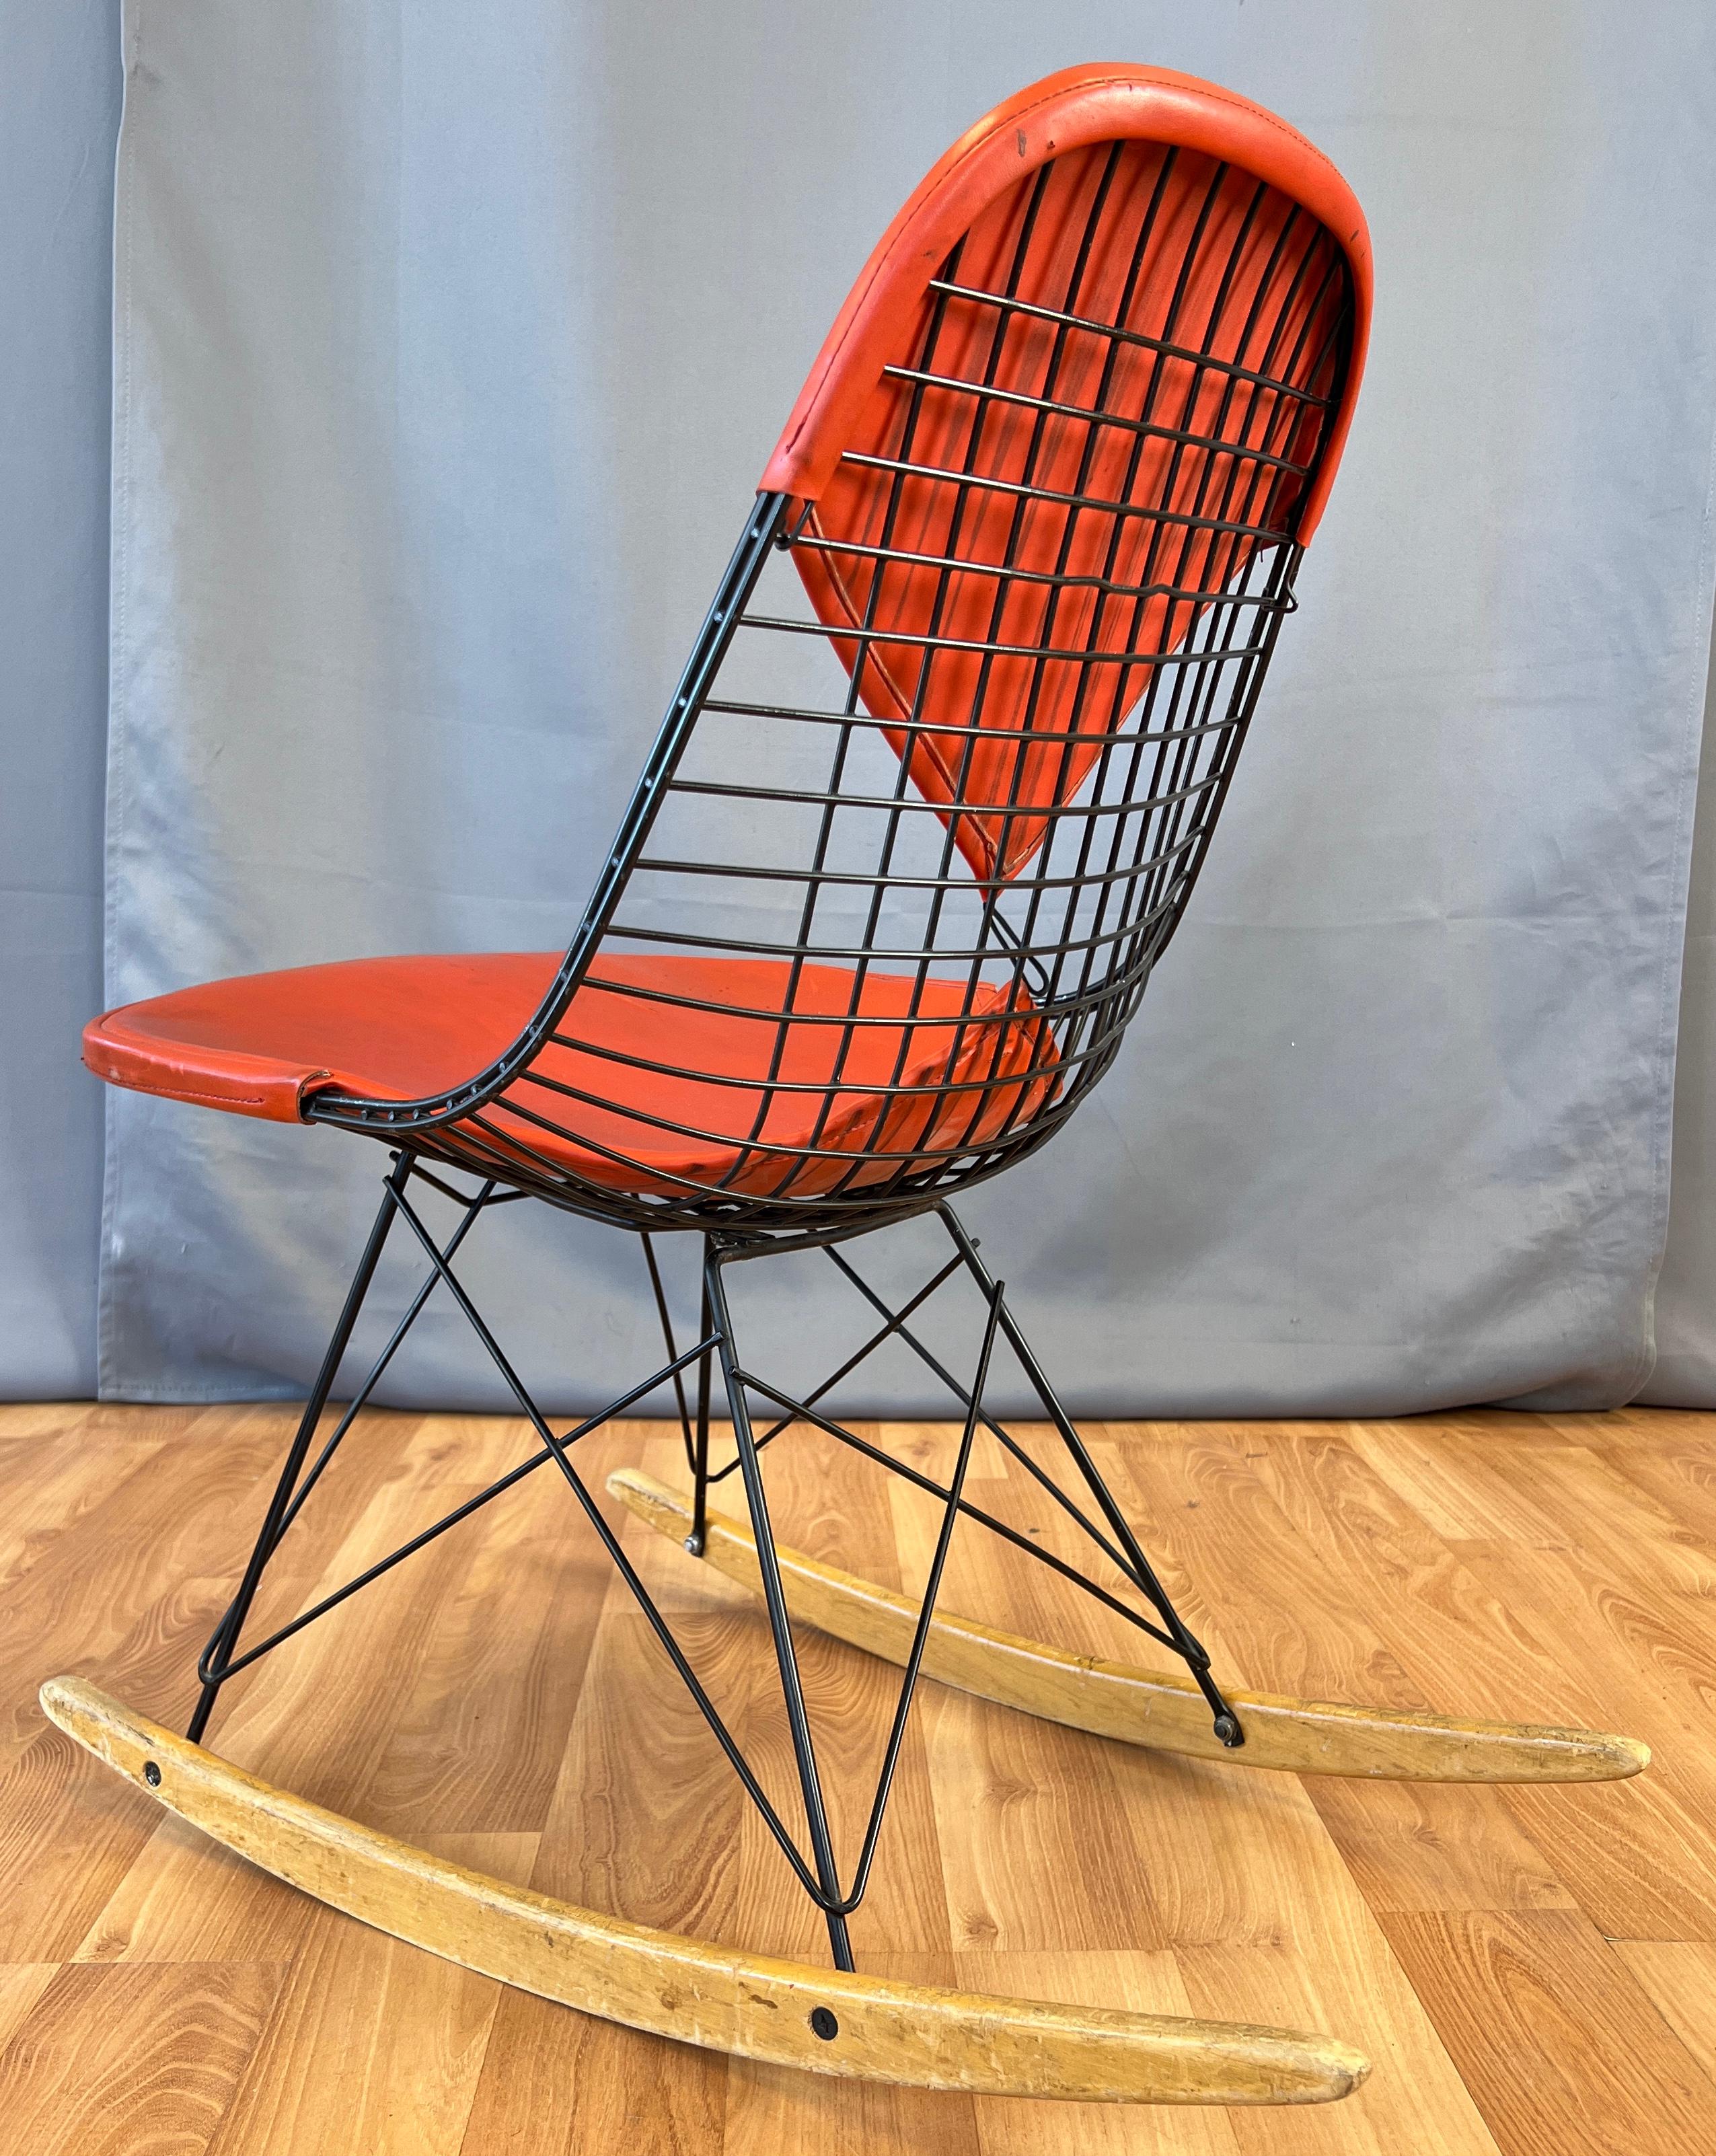 Mid-20th Century Charles and Ray Eames Designed 1st Generation RKR Rocker for Herman Miller For Sale